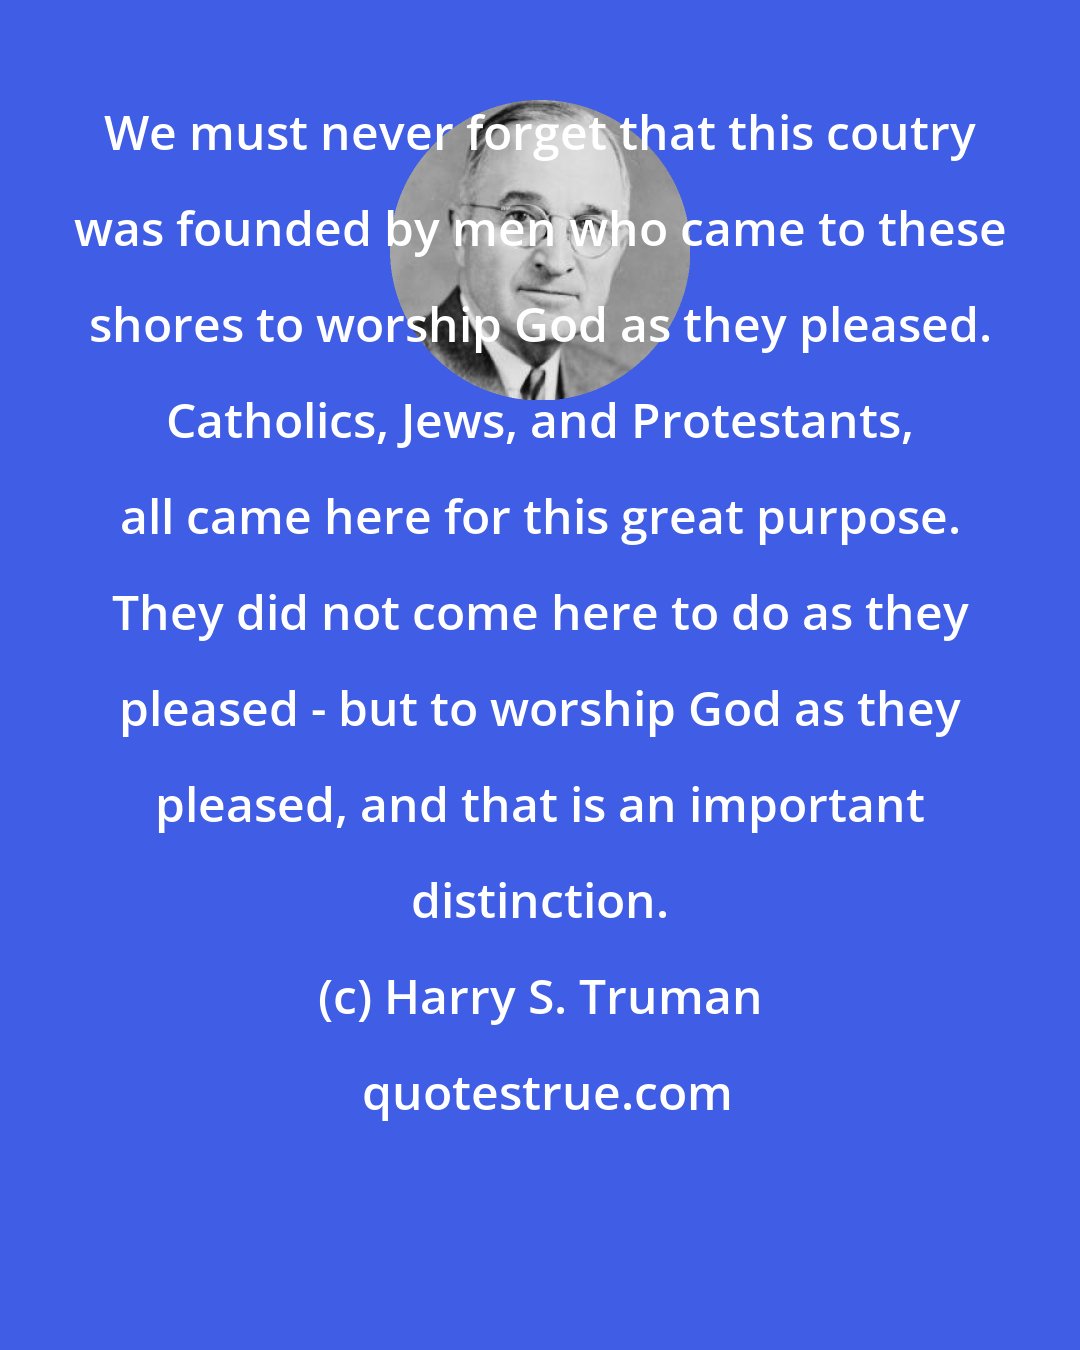 Harry S. Truman: We must never forget that this coutry was founded by men who came to these shores to worship God as they pleased. Catholics, Jews, and Protestants, all came here for this great purpose. They did not come here to do as they pleased - but to worship God as they pleased, and that is an important distinction.